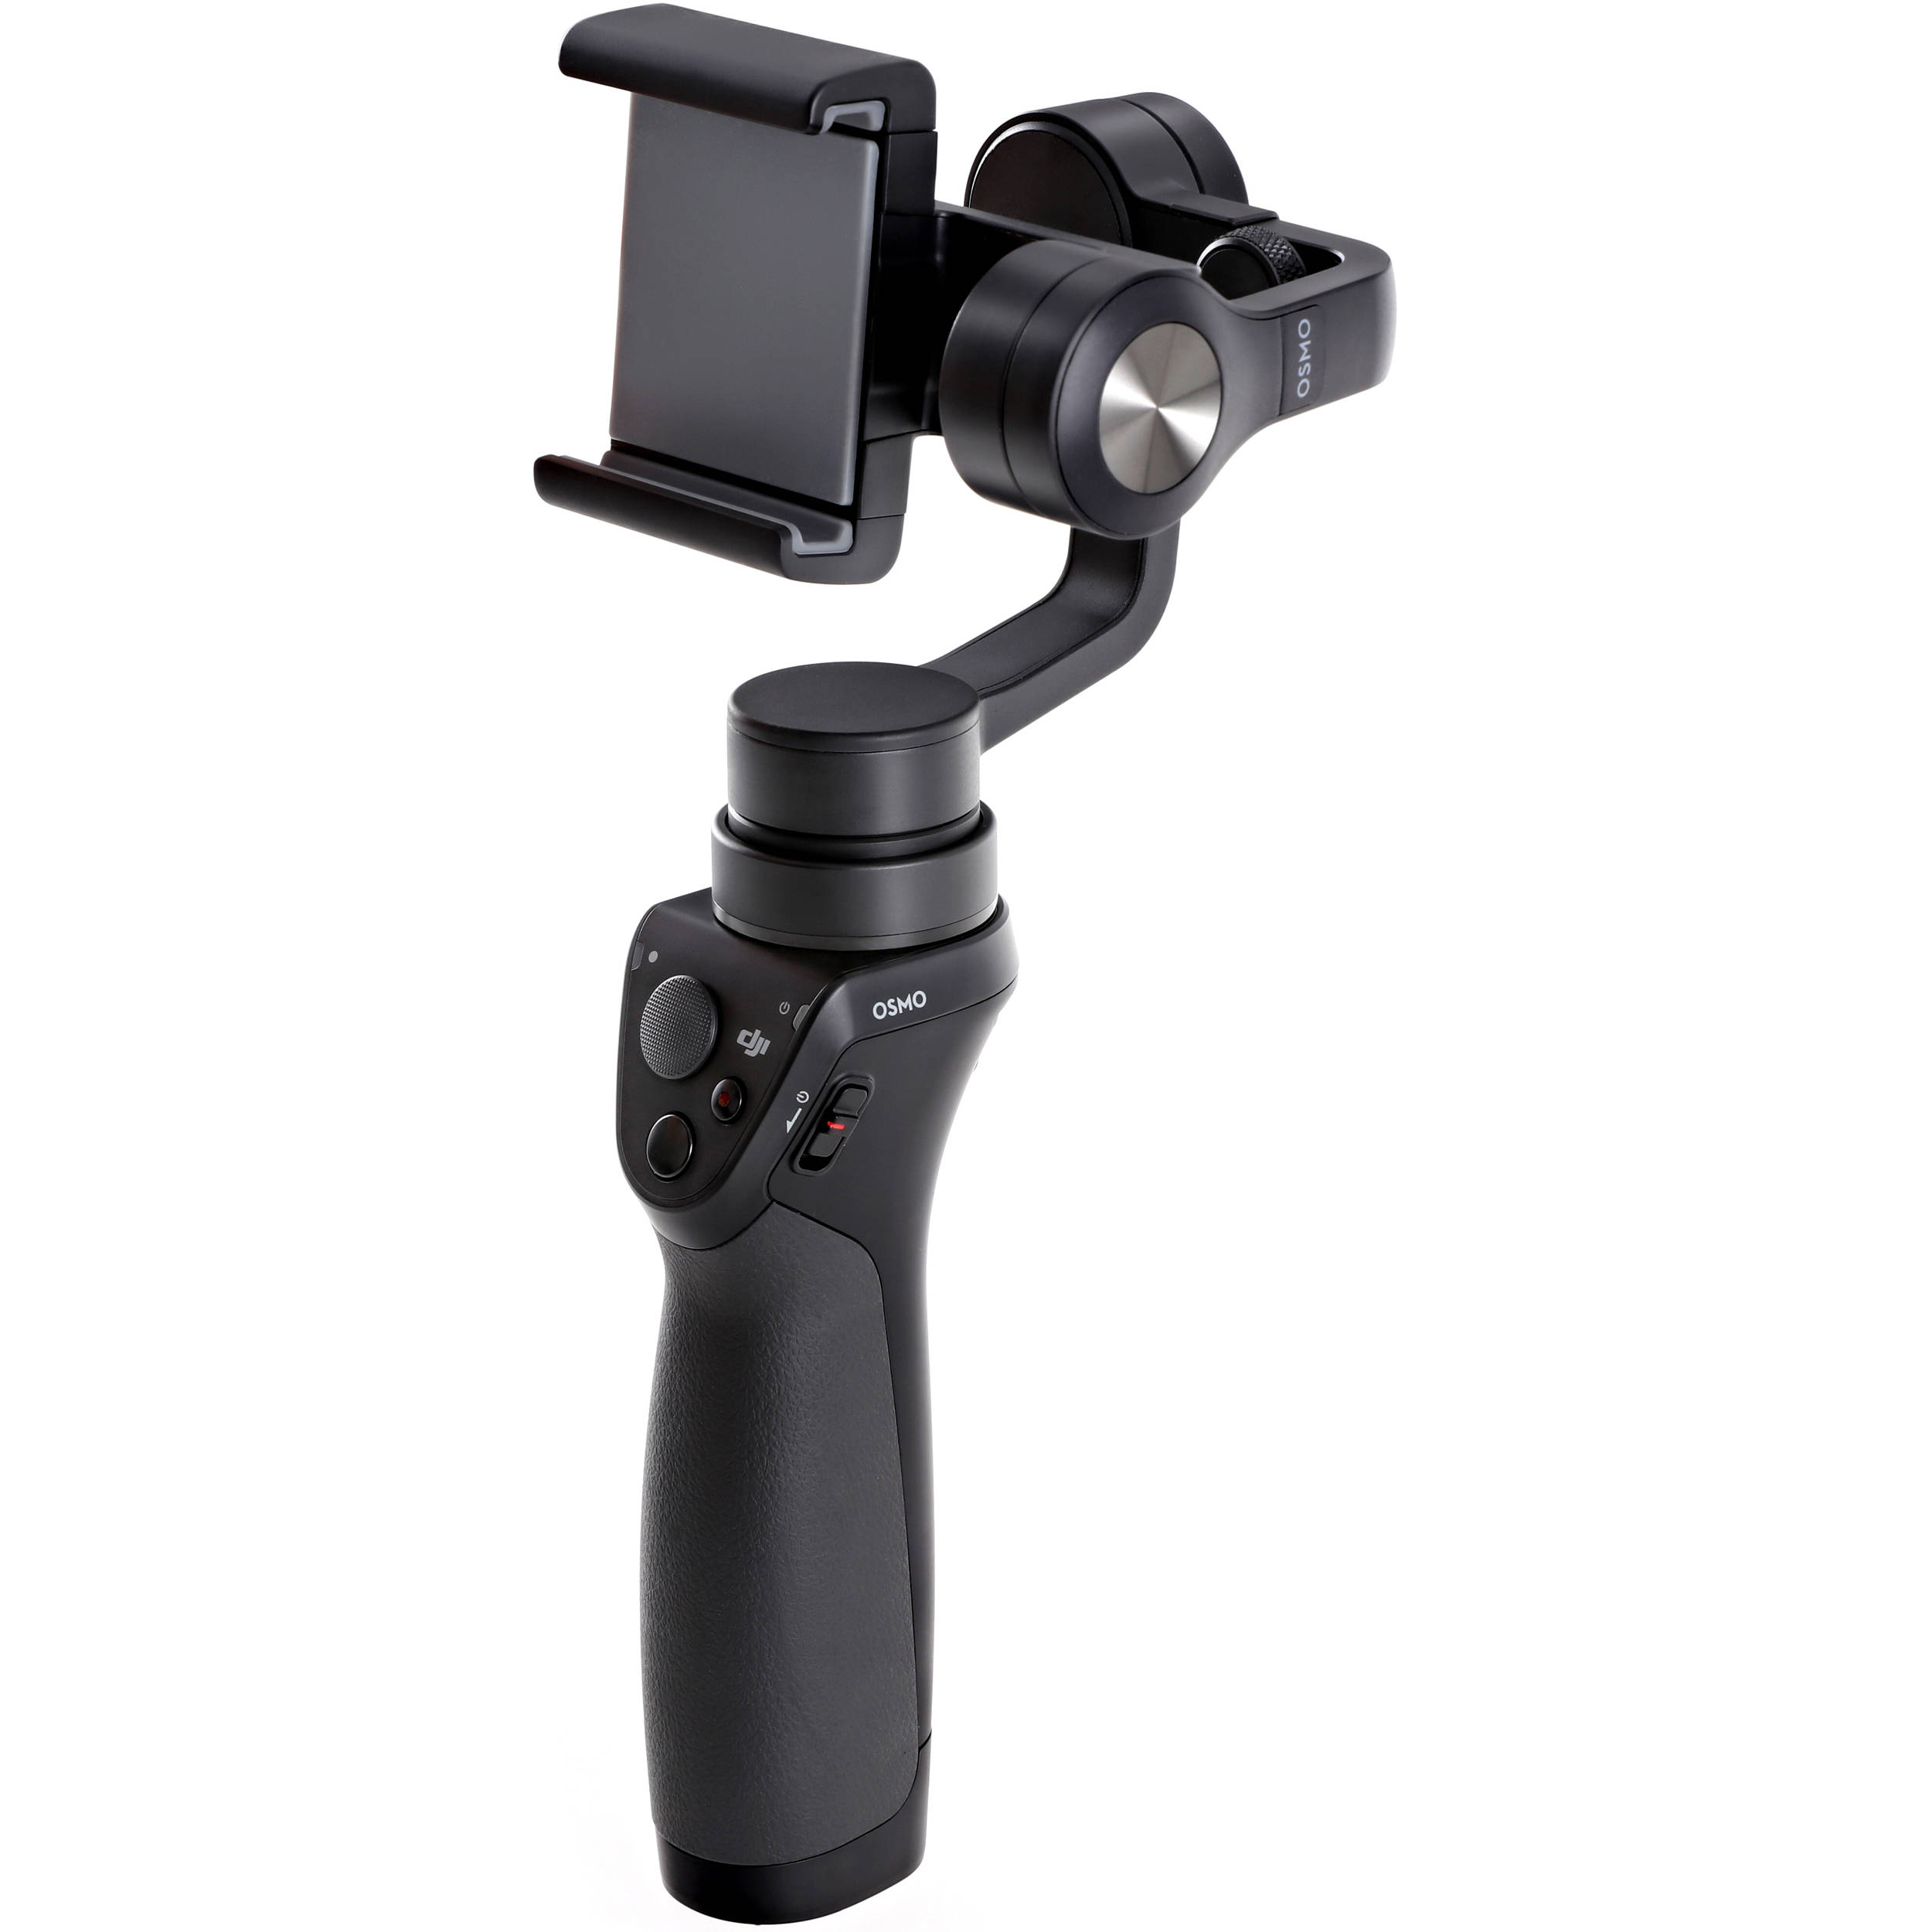 Dji Osmo Mobile Gimbal Stabilizer For Smartphones Cp Zm 000449